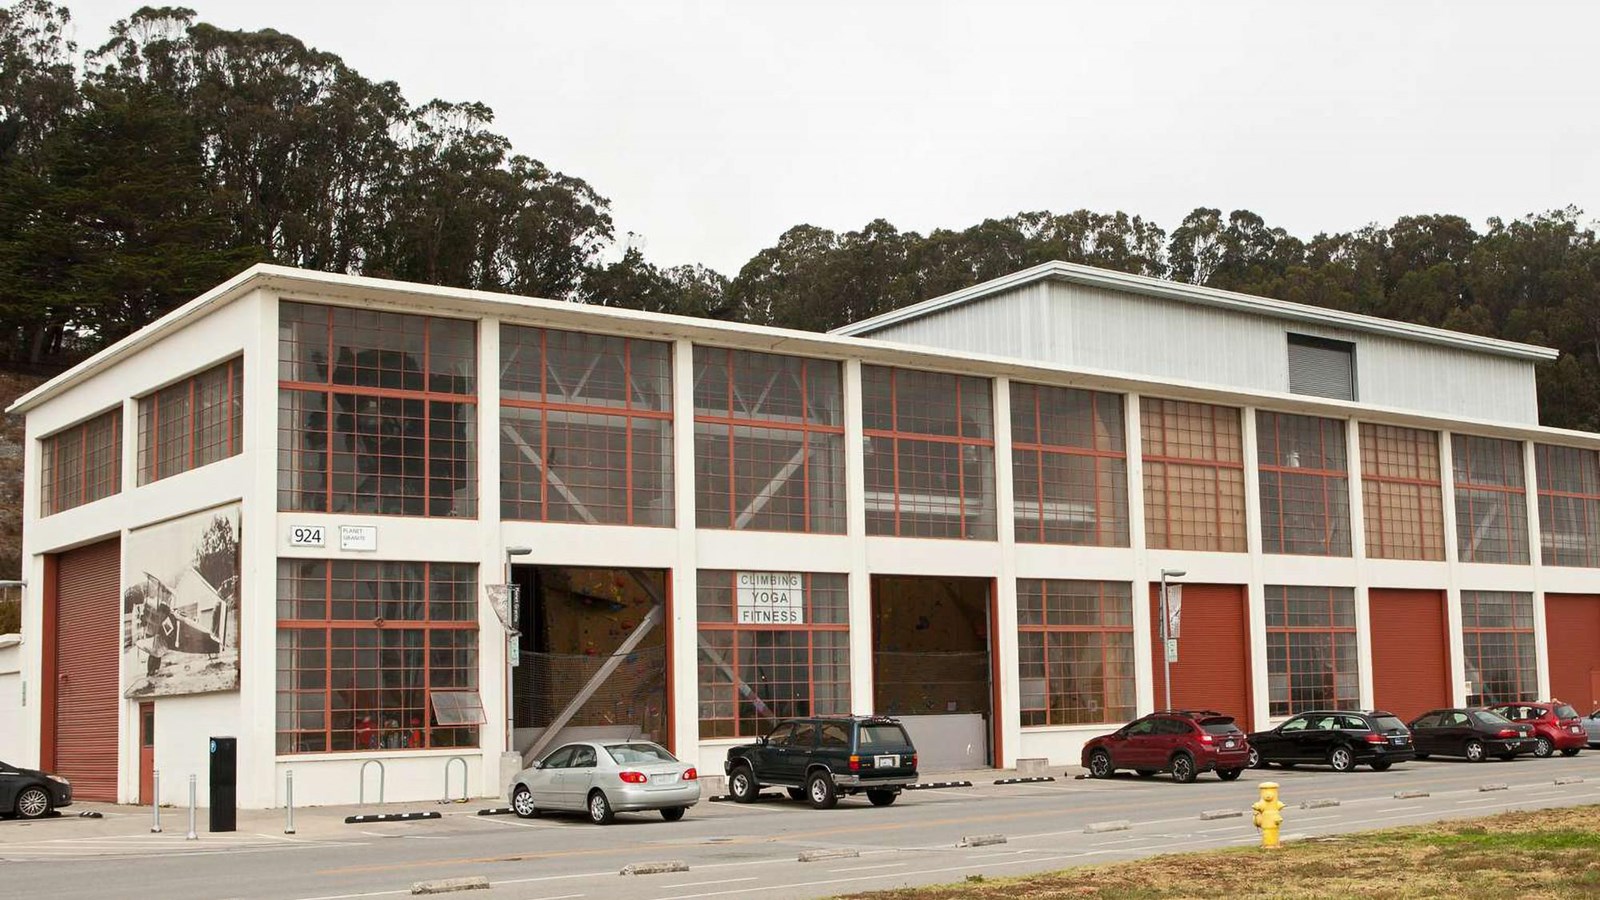 Exterior view of Planet Granite in an old military warehouse at Crissy Field.